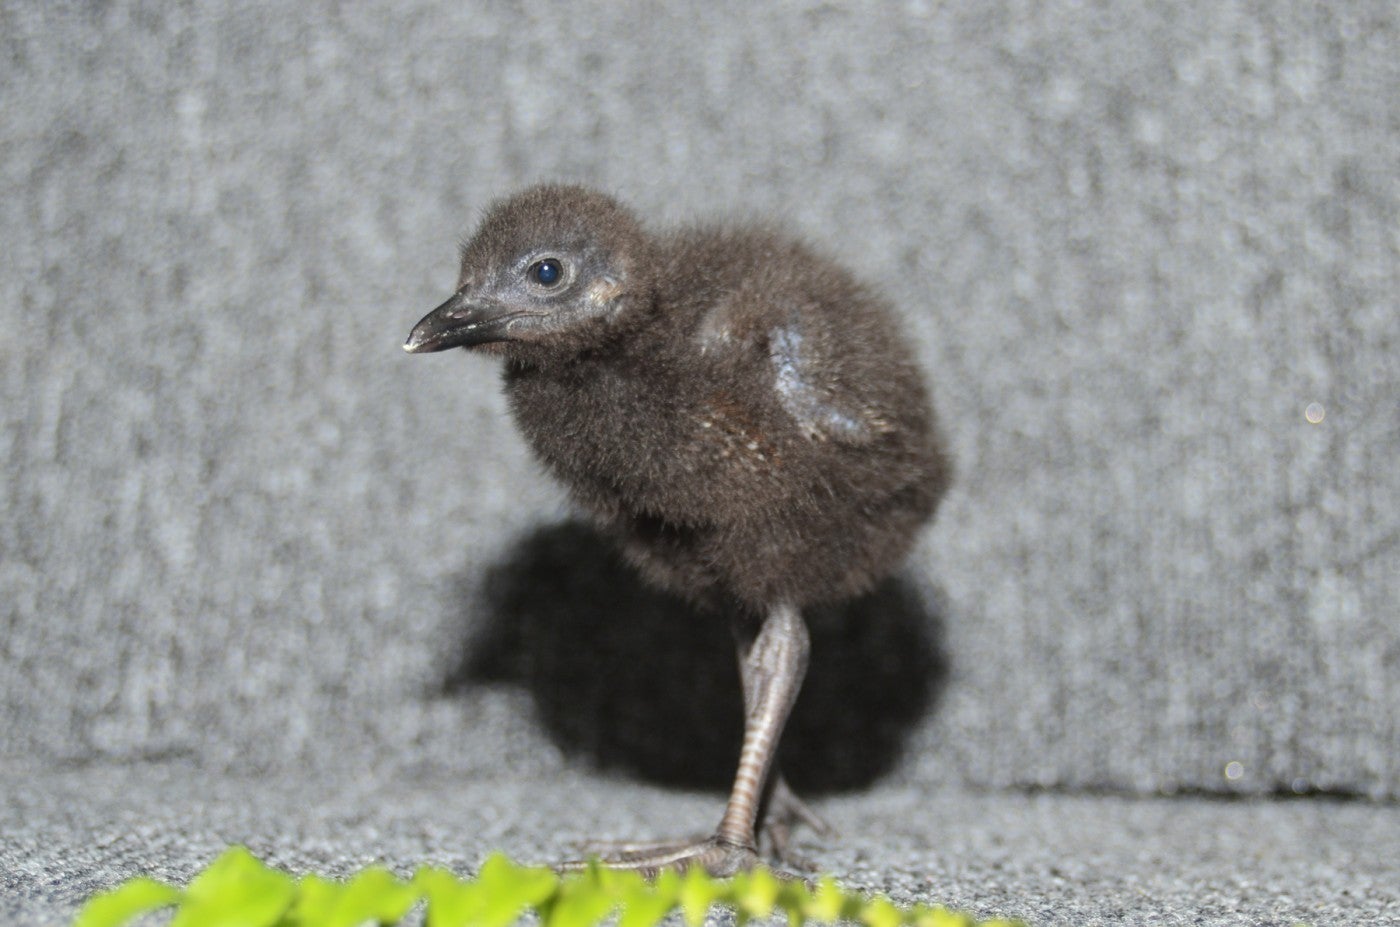 A 13-day-old Guam rail, named Tasi, with a small body, fluffy, black feathers and long legs.